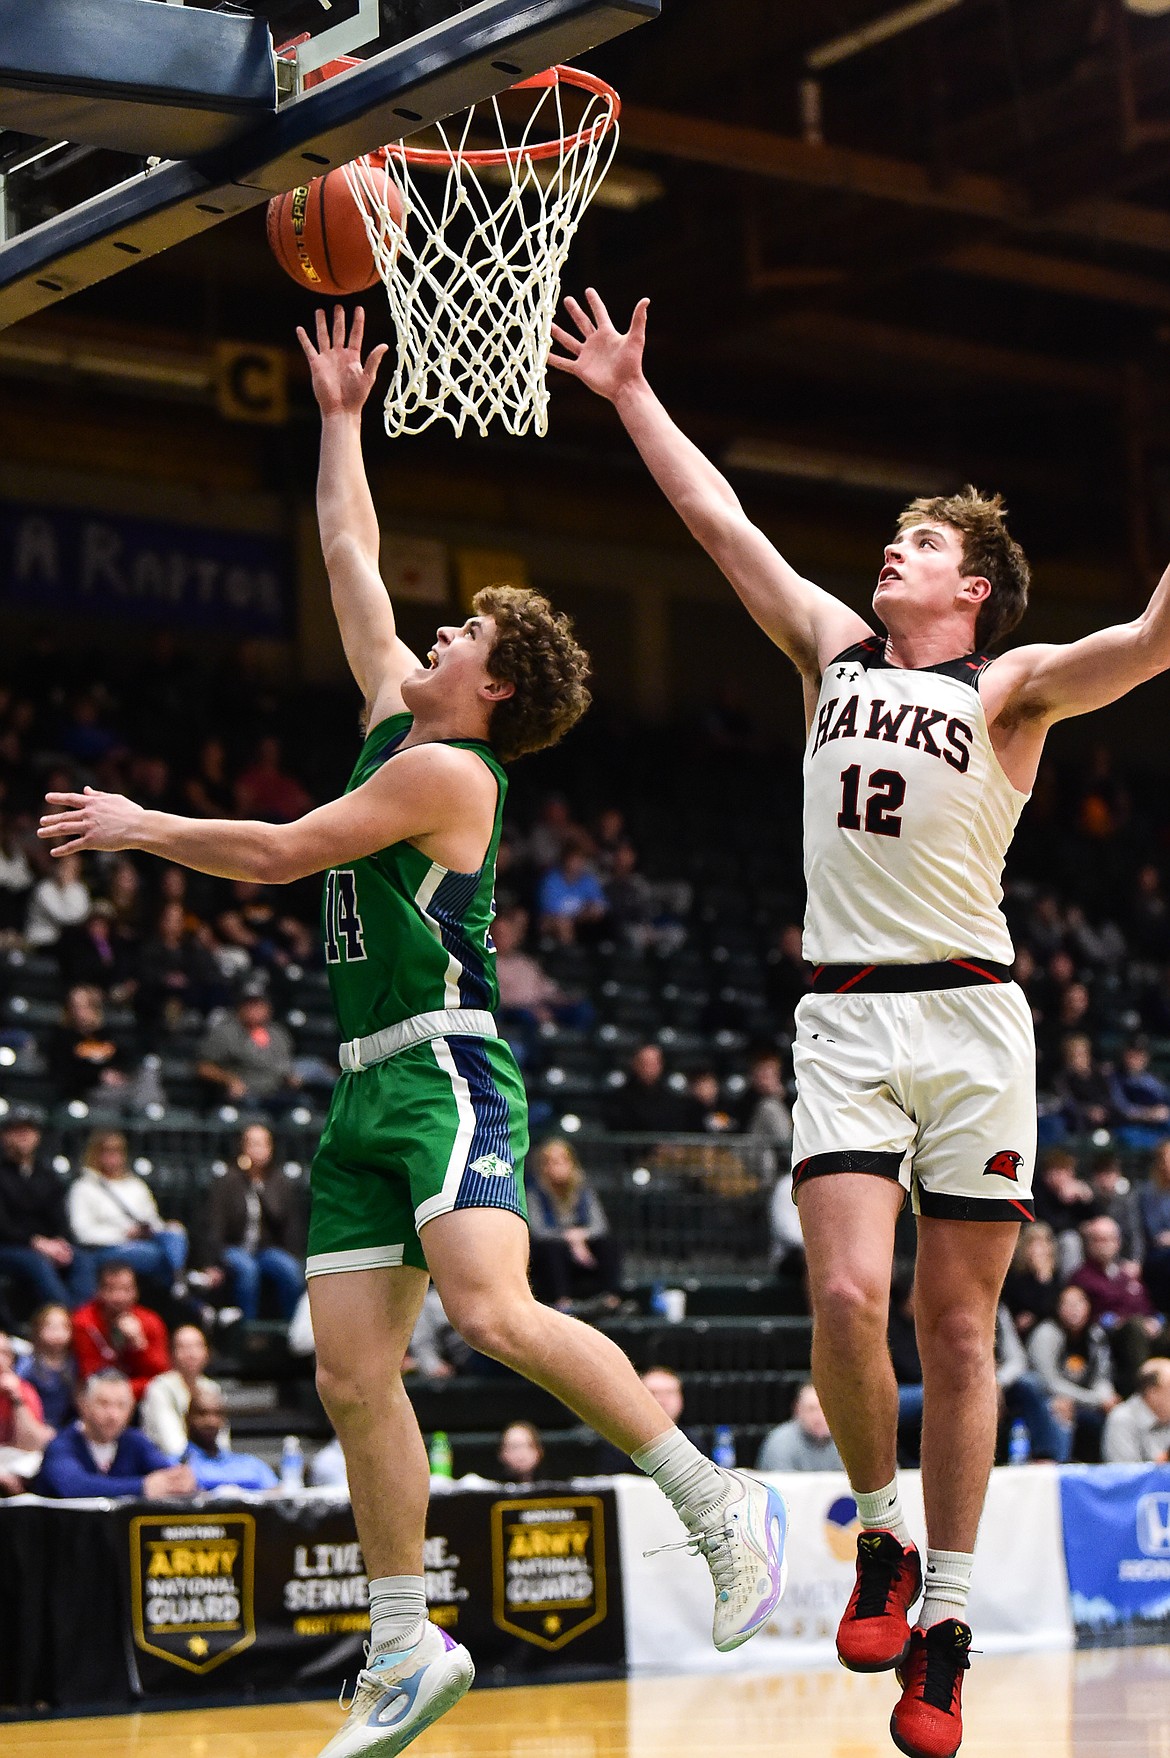 Glacier's Kaidrian Buls (14) drives to the basket past Bozeman's Rocky Lencioni (12) in the first half of the third-place game at the Class AA state basketball tournament at the Butte Civic Center on Saturday, March 11. (Casey Kreider/Daily Inter Lake)